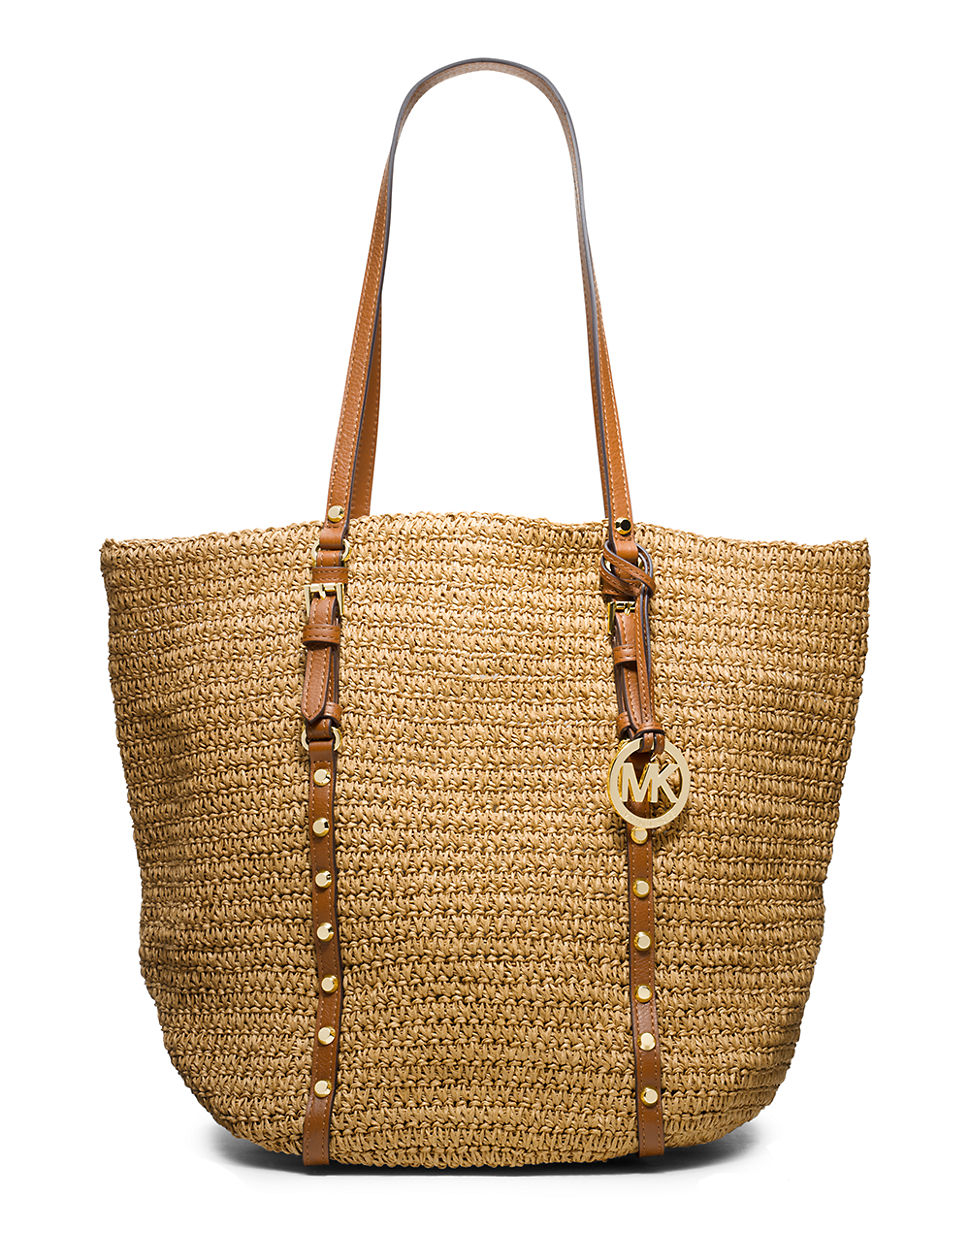 MICHAEL Michael Kors Straw And Studded Leather Large Shopper Tote Bag in Brown - Lyst